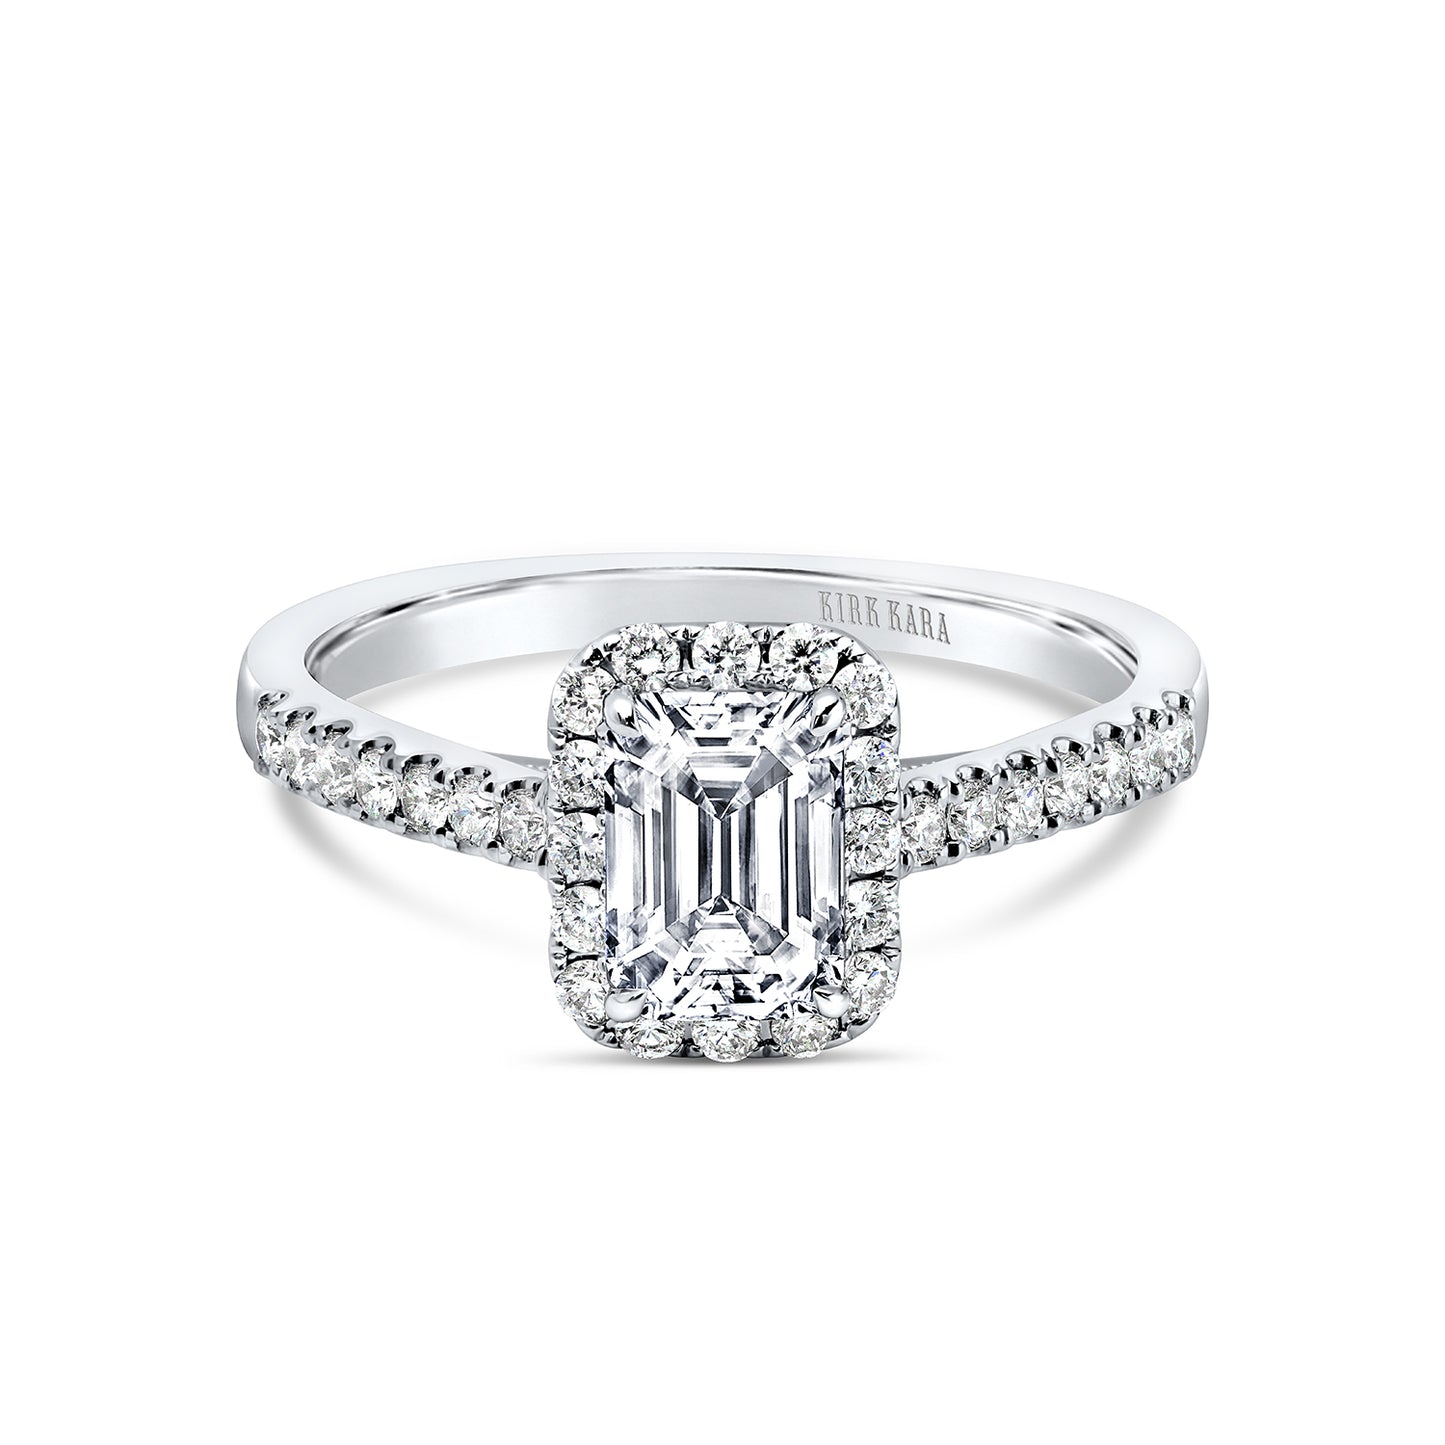 Classic Delicate Prong Set Halo Diamond Engagement Ring